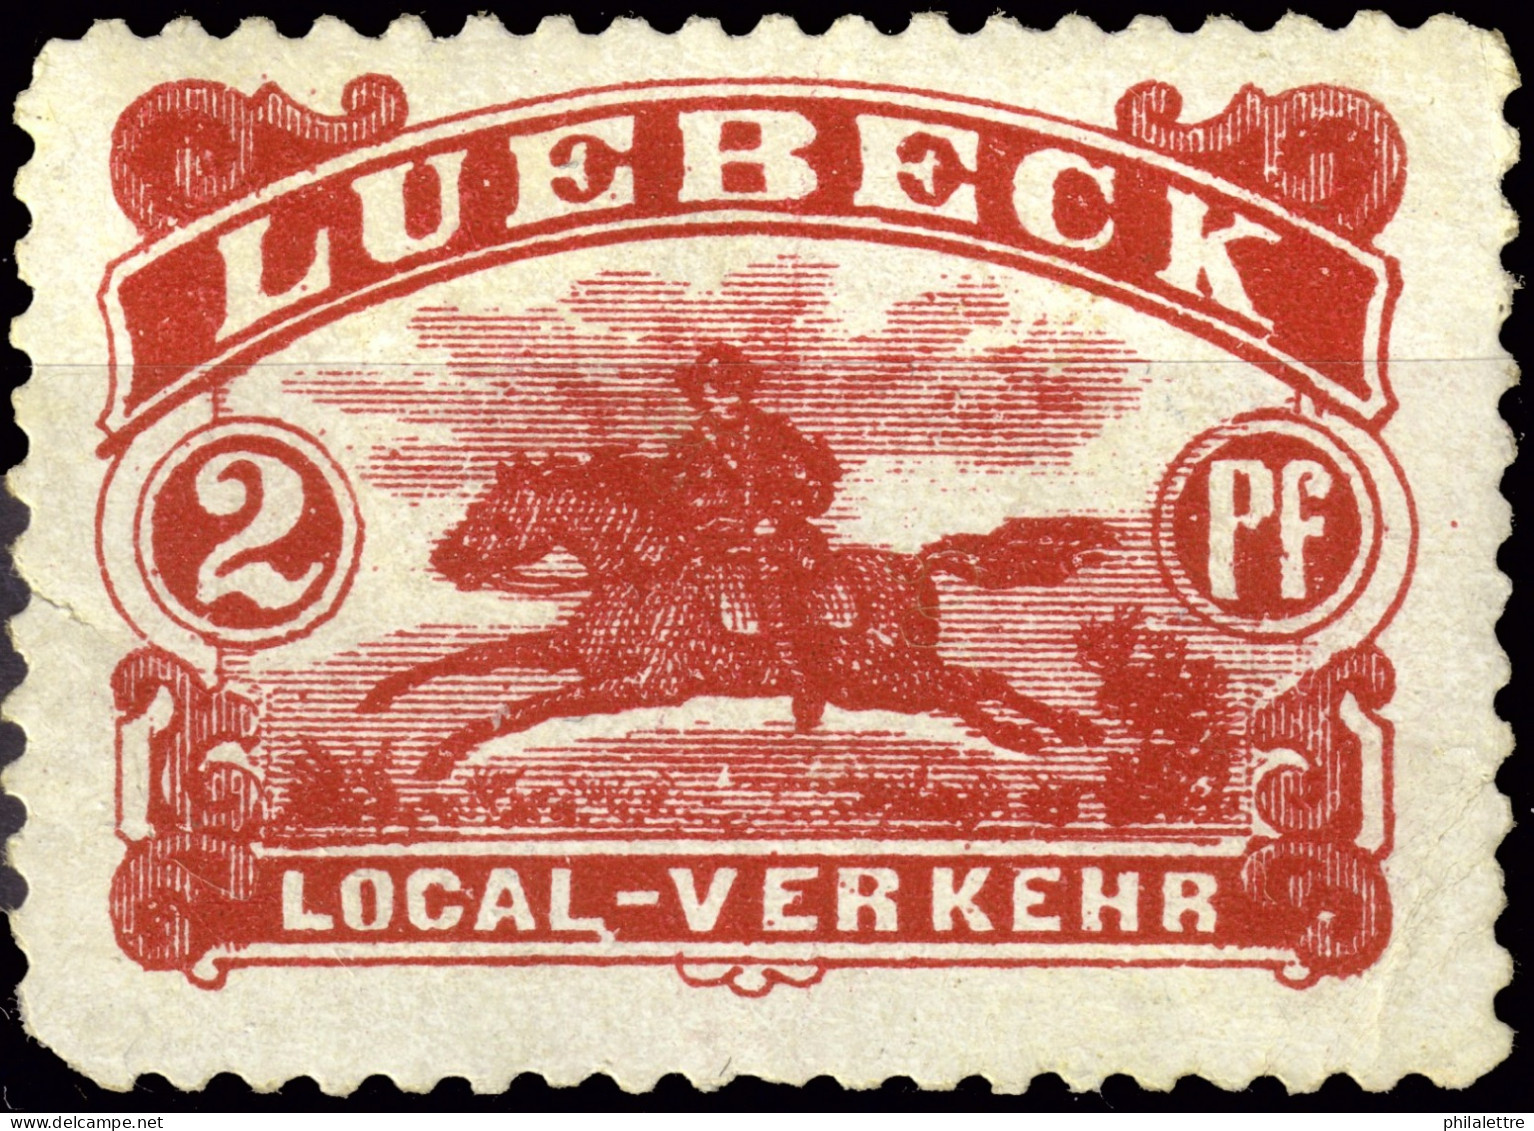 ALLEMAGNE / GERMANY - DR Privatpost LÜBECK (Local-Verkehr) 2p Red - Mint* - Correos Privados & Locales